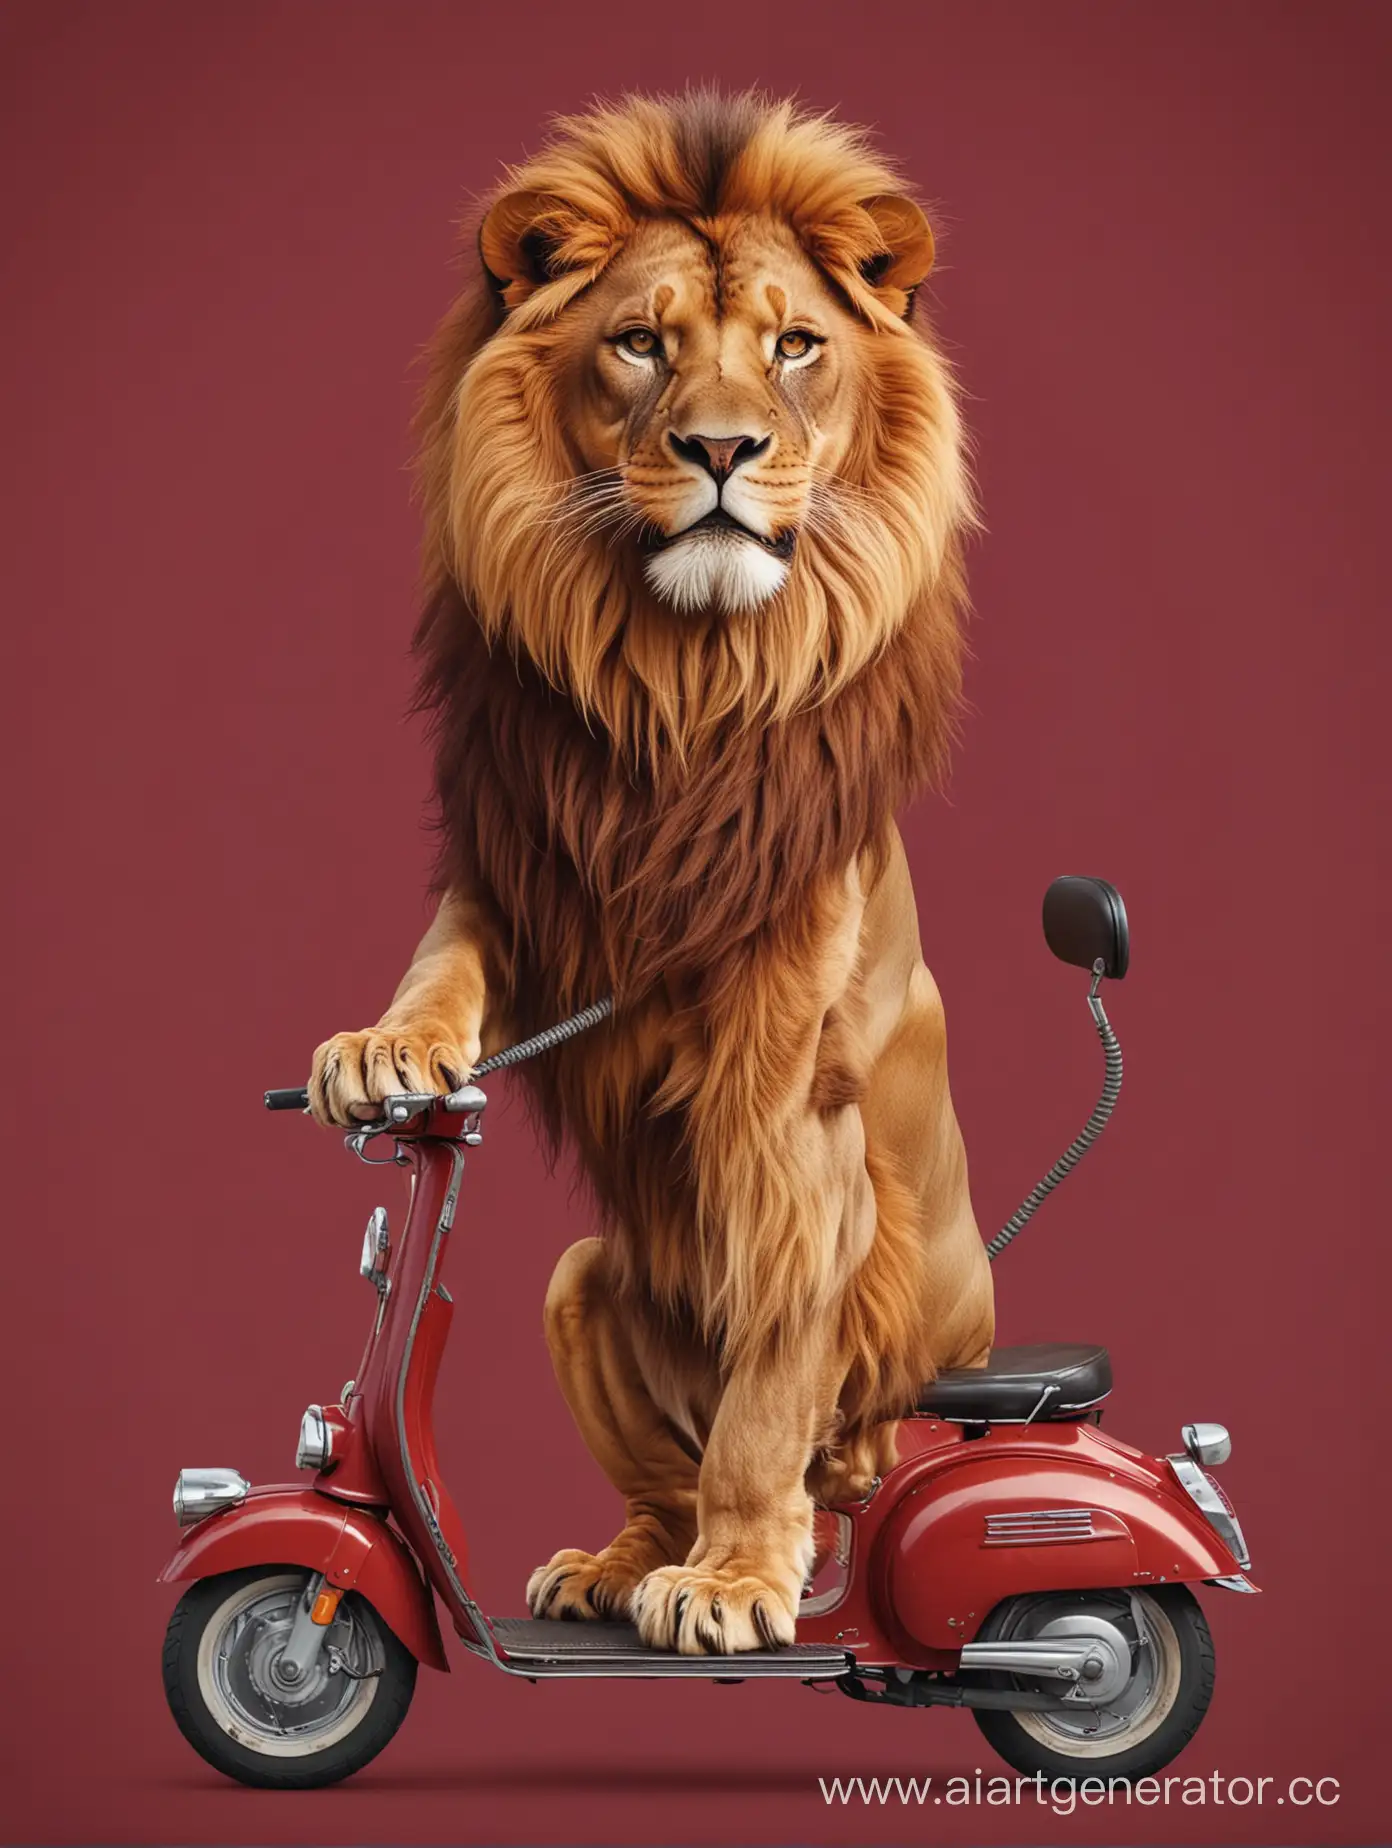 Lion-Riding-Scooter-on-Vibrant-Burgundy-Background